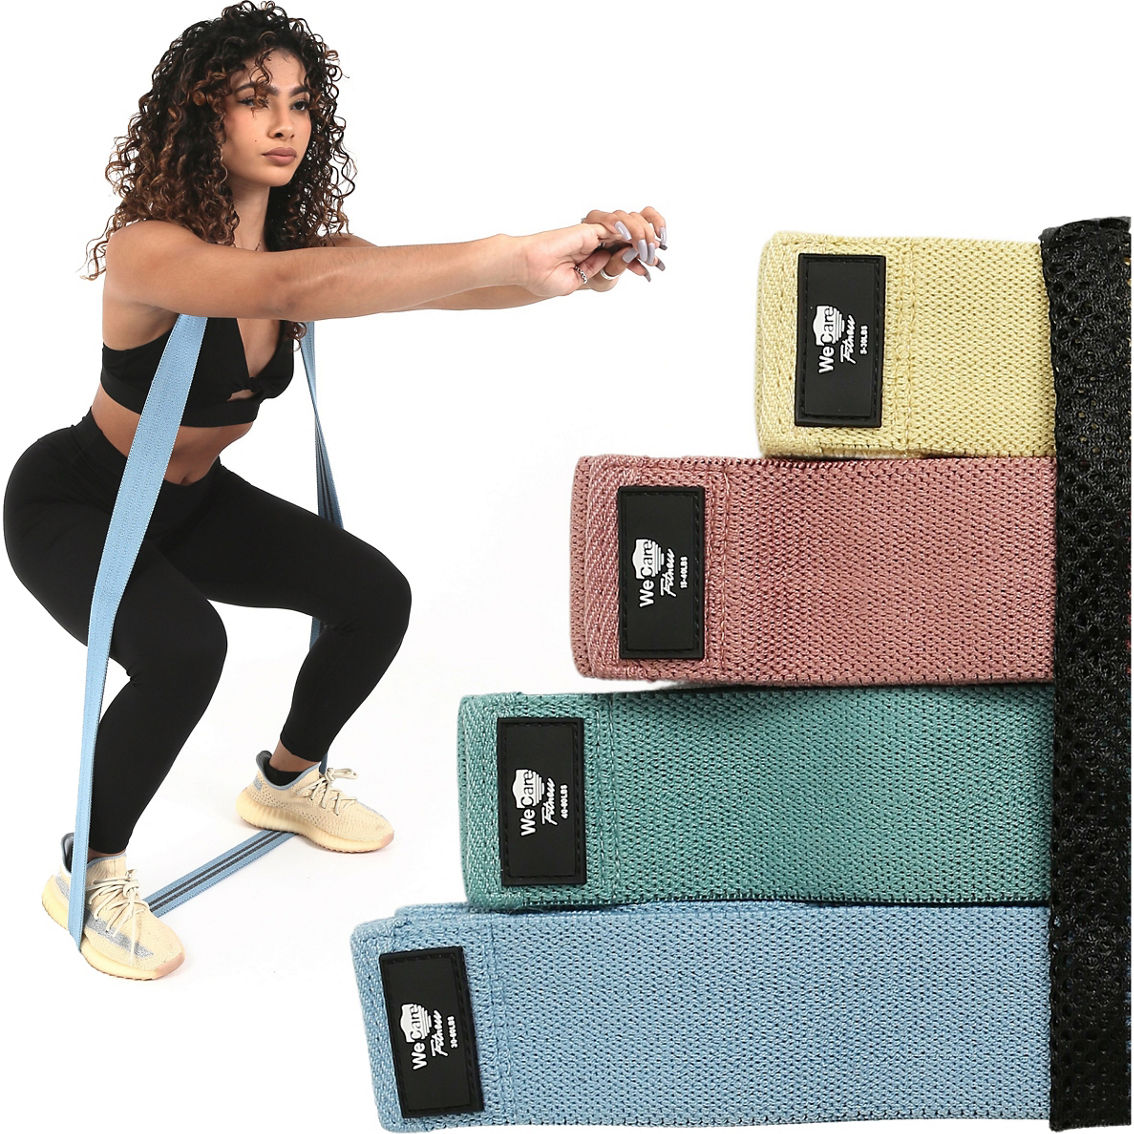 WeCare Fitness Full-Body Workout Resistance Bands 4 pk. - Image 7 of 10